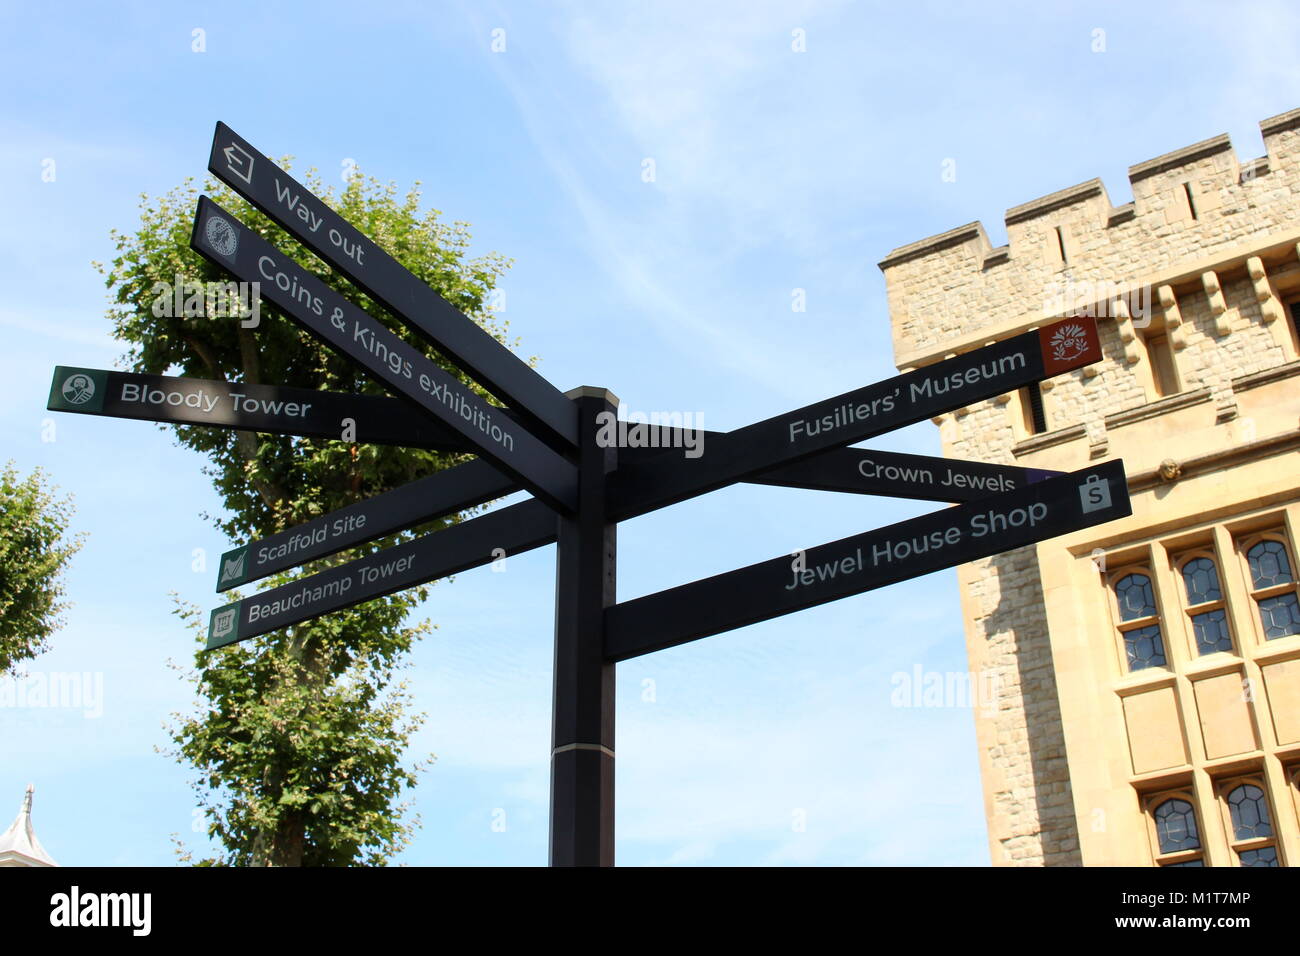 London, United Kingdom - August 26 2017: A sign post in the grounds of the Tower of London, depicting directions to the Crown Jewels. Stock Photo